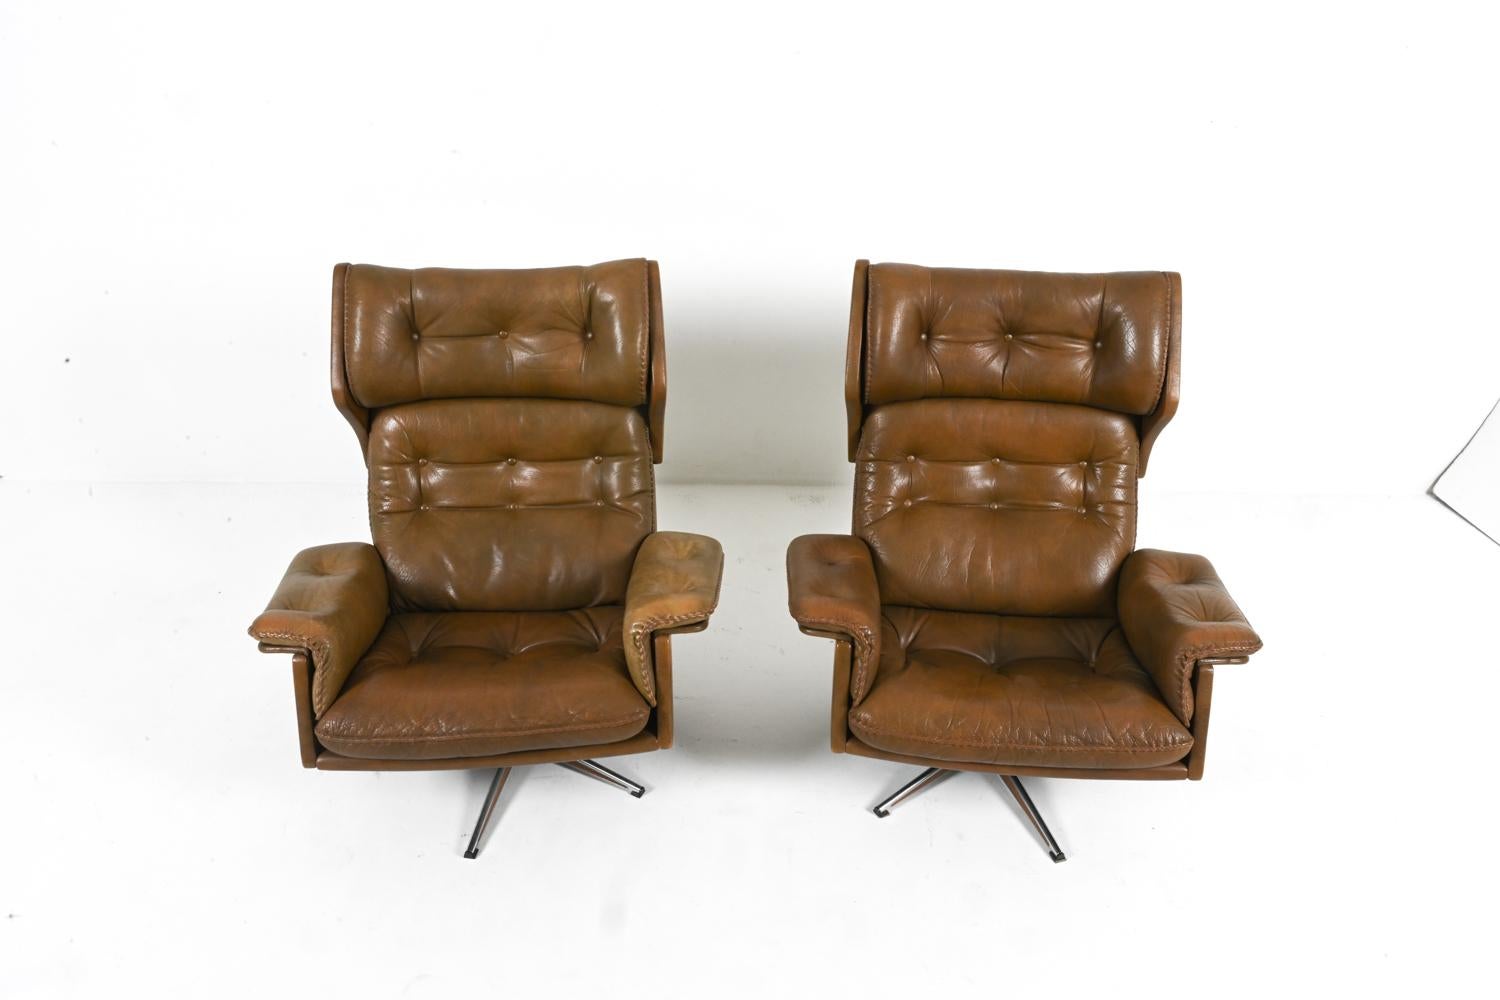 Pair of Buffalo Leather Swivel Chairs By Arne Norell, Swedish 1960's In Good Condition For Sale In Norwalk, CT